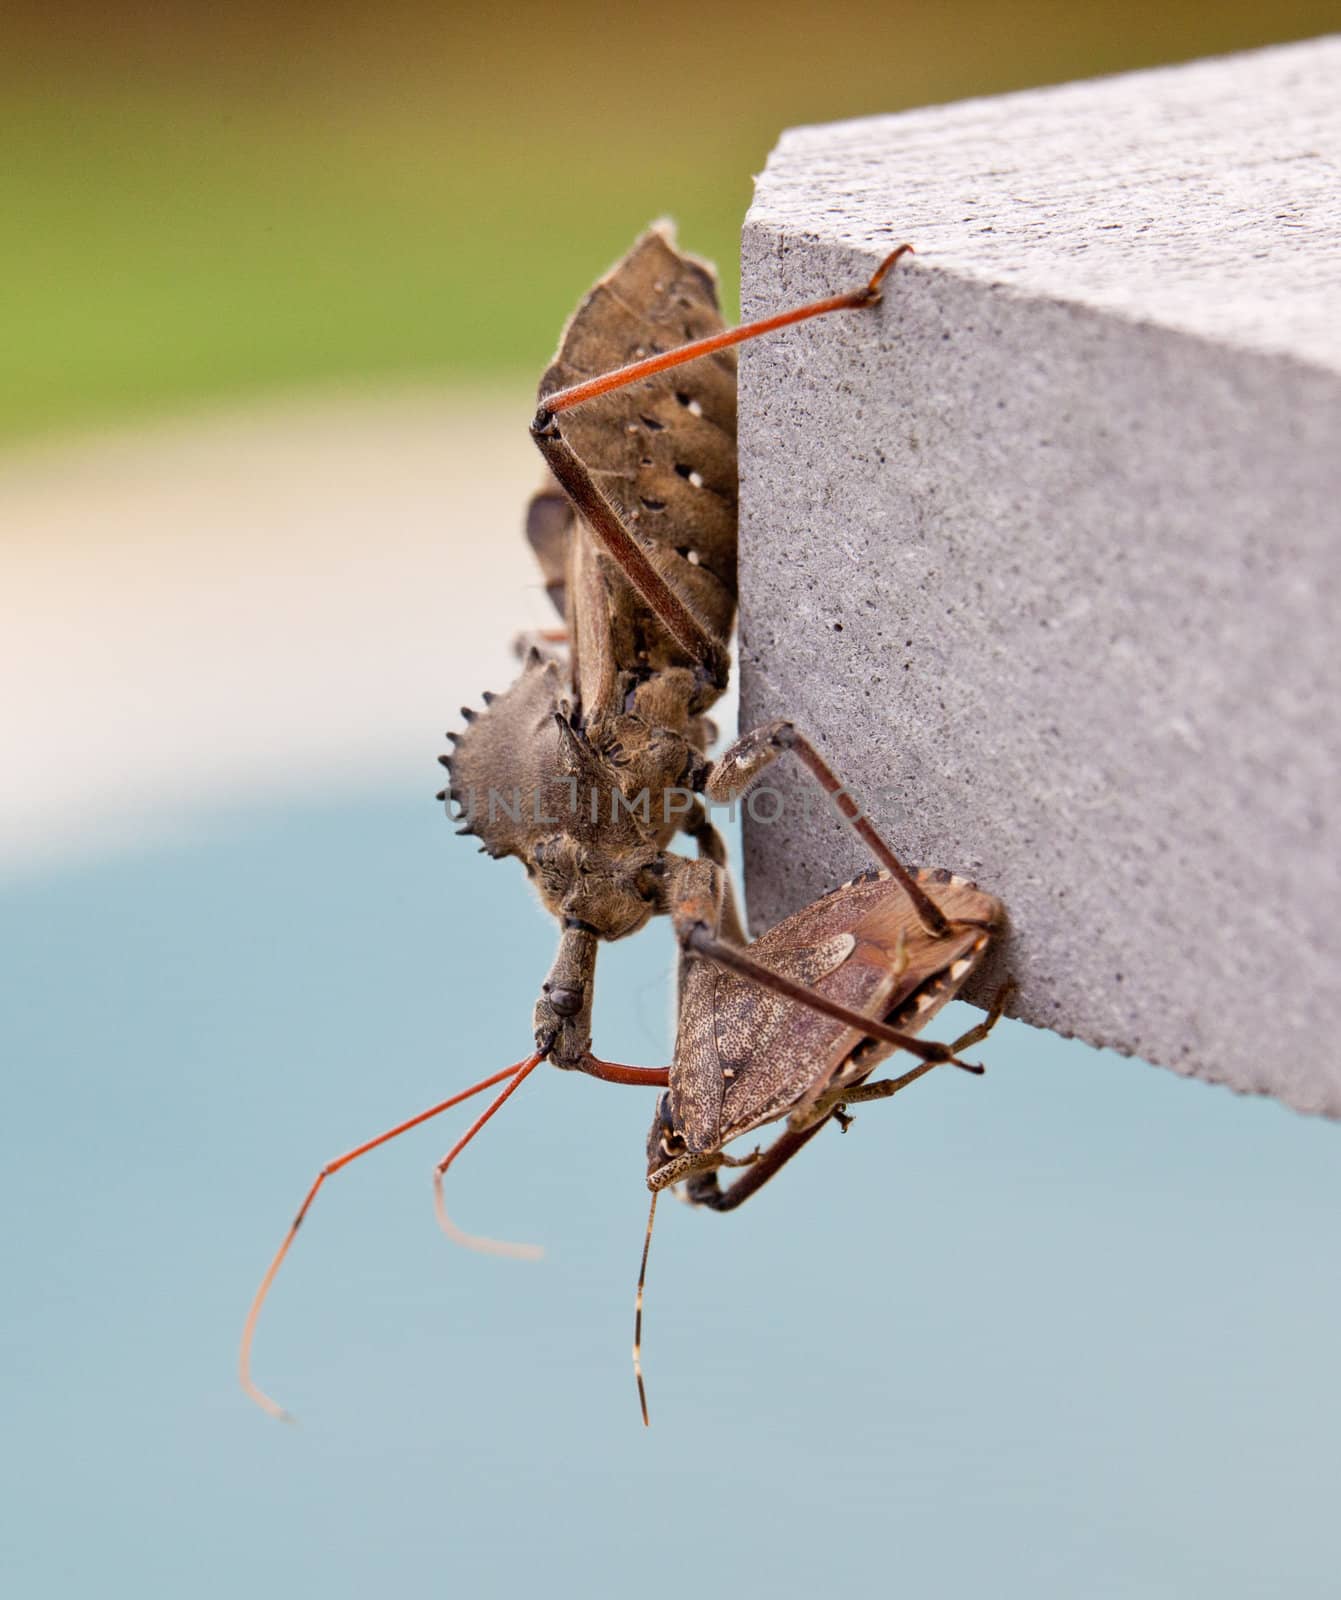 Rare shot of the predatory Assassin bug injecting venom into the body of a Stink or Shield bug